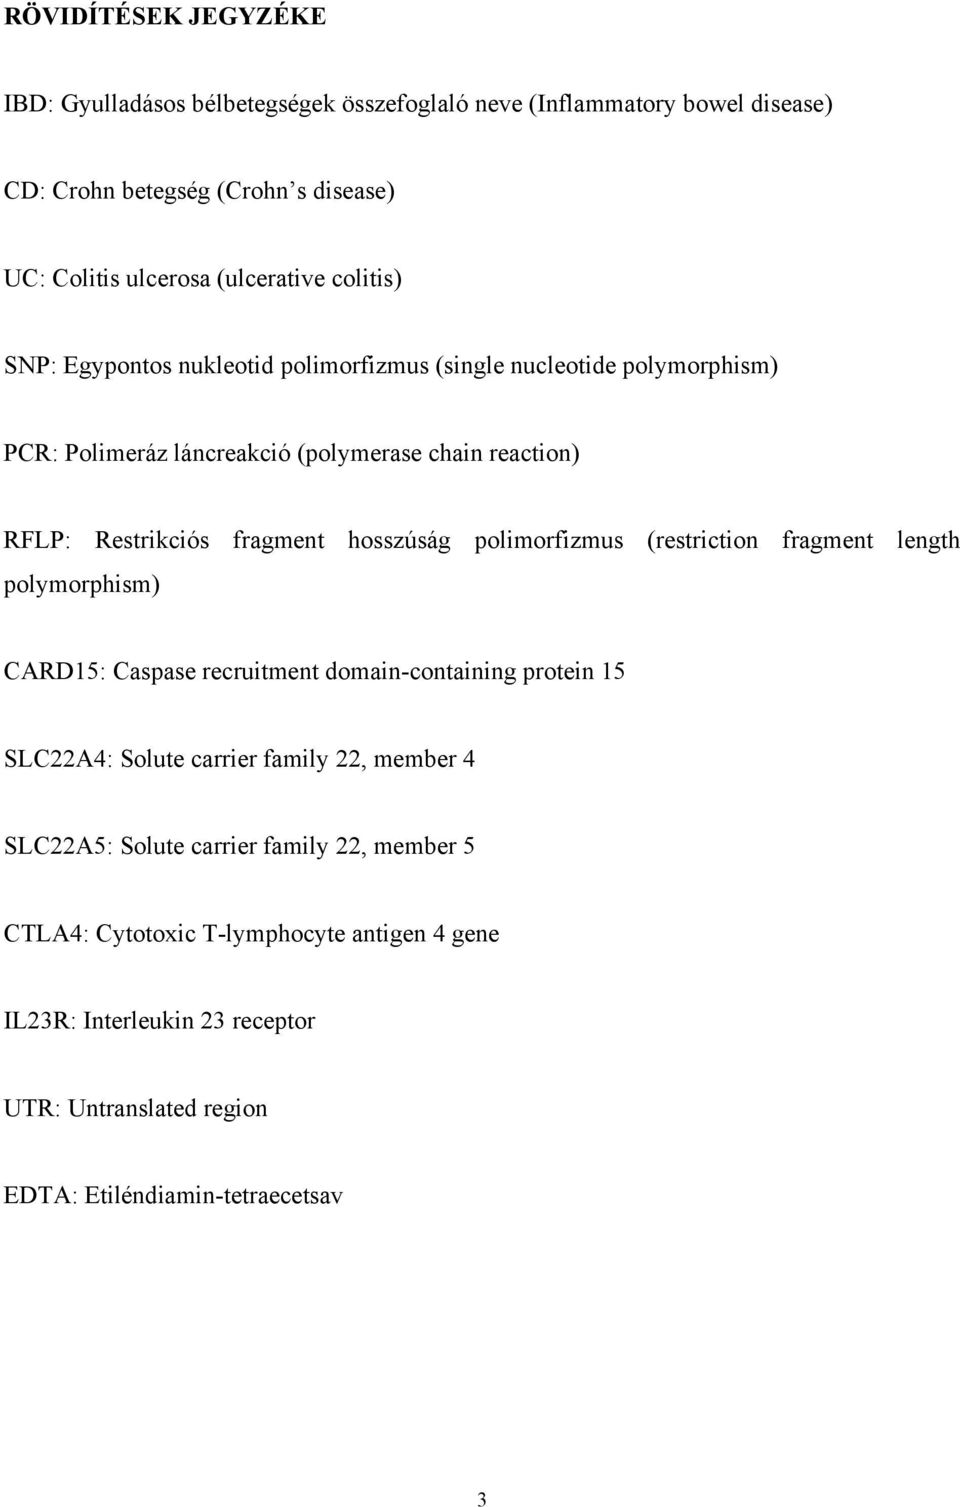 hosszúság polimorfizmus (restriction fragment length polymorphism) CARD15: Caspase recruitment domain-containing protein 15 SLC22A4: Solute carrier family 22, member 4